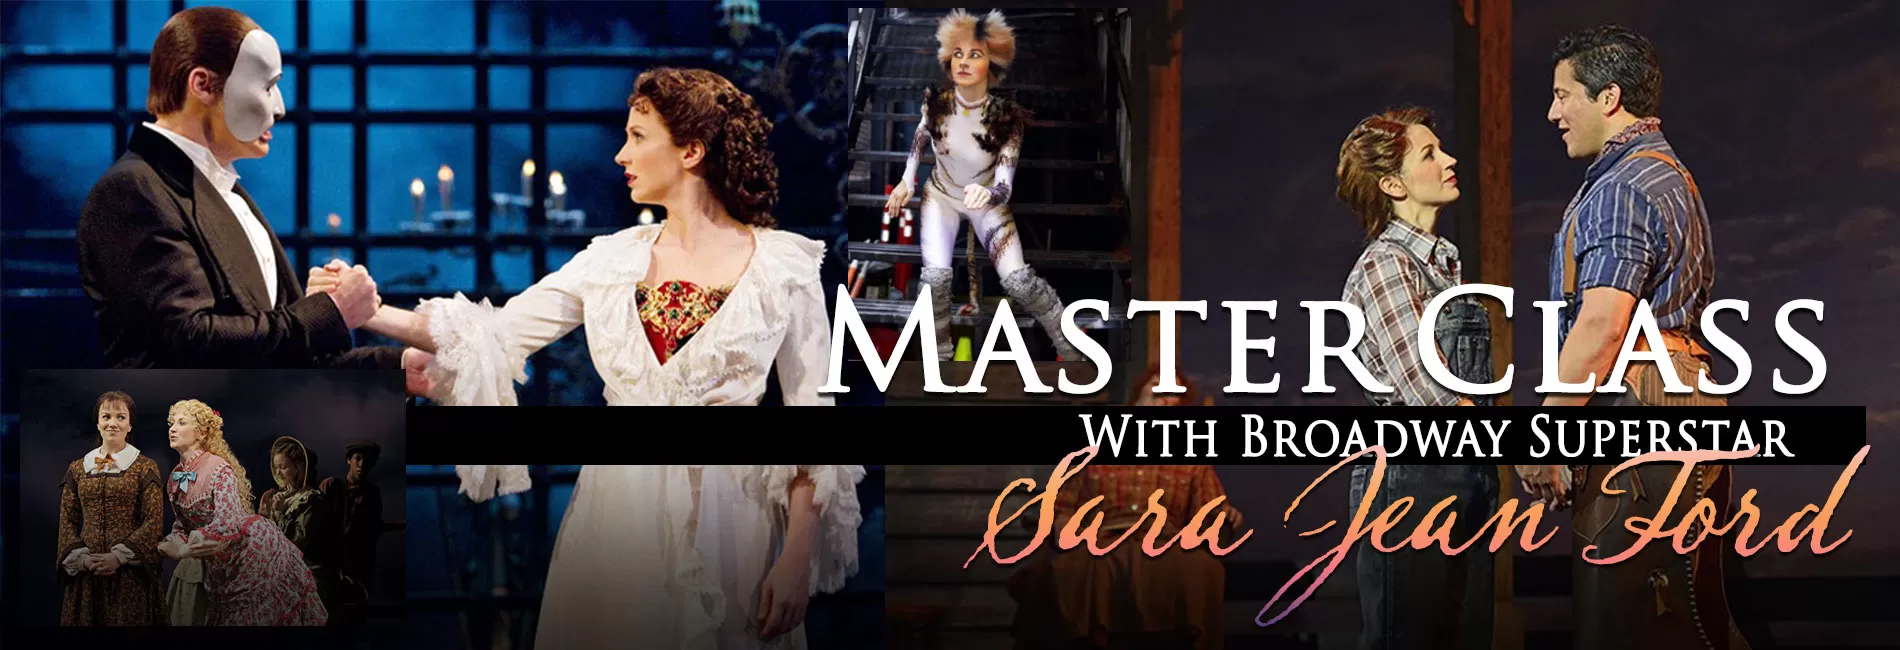 NEW! MASTER CLASS WITH BROADWAY SUPERSTAR SARA JEAN FORD